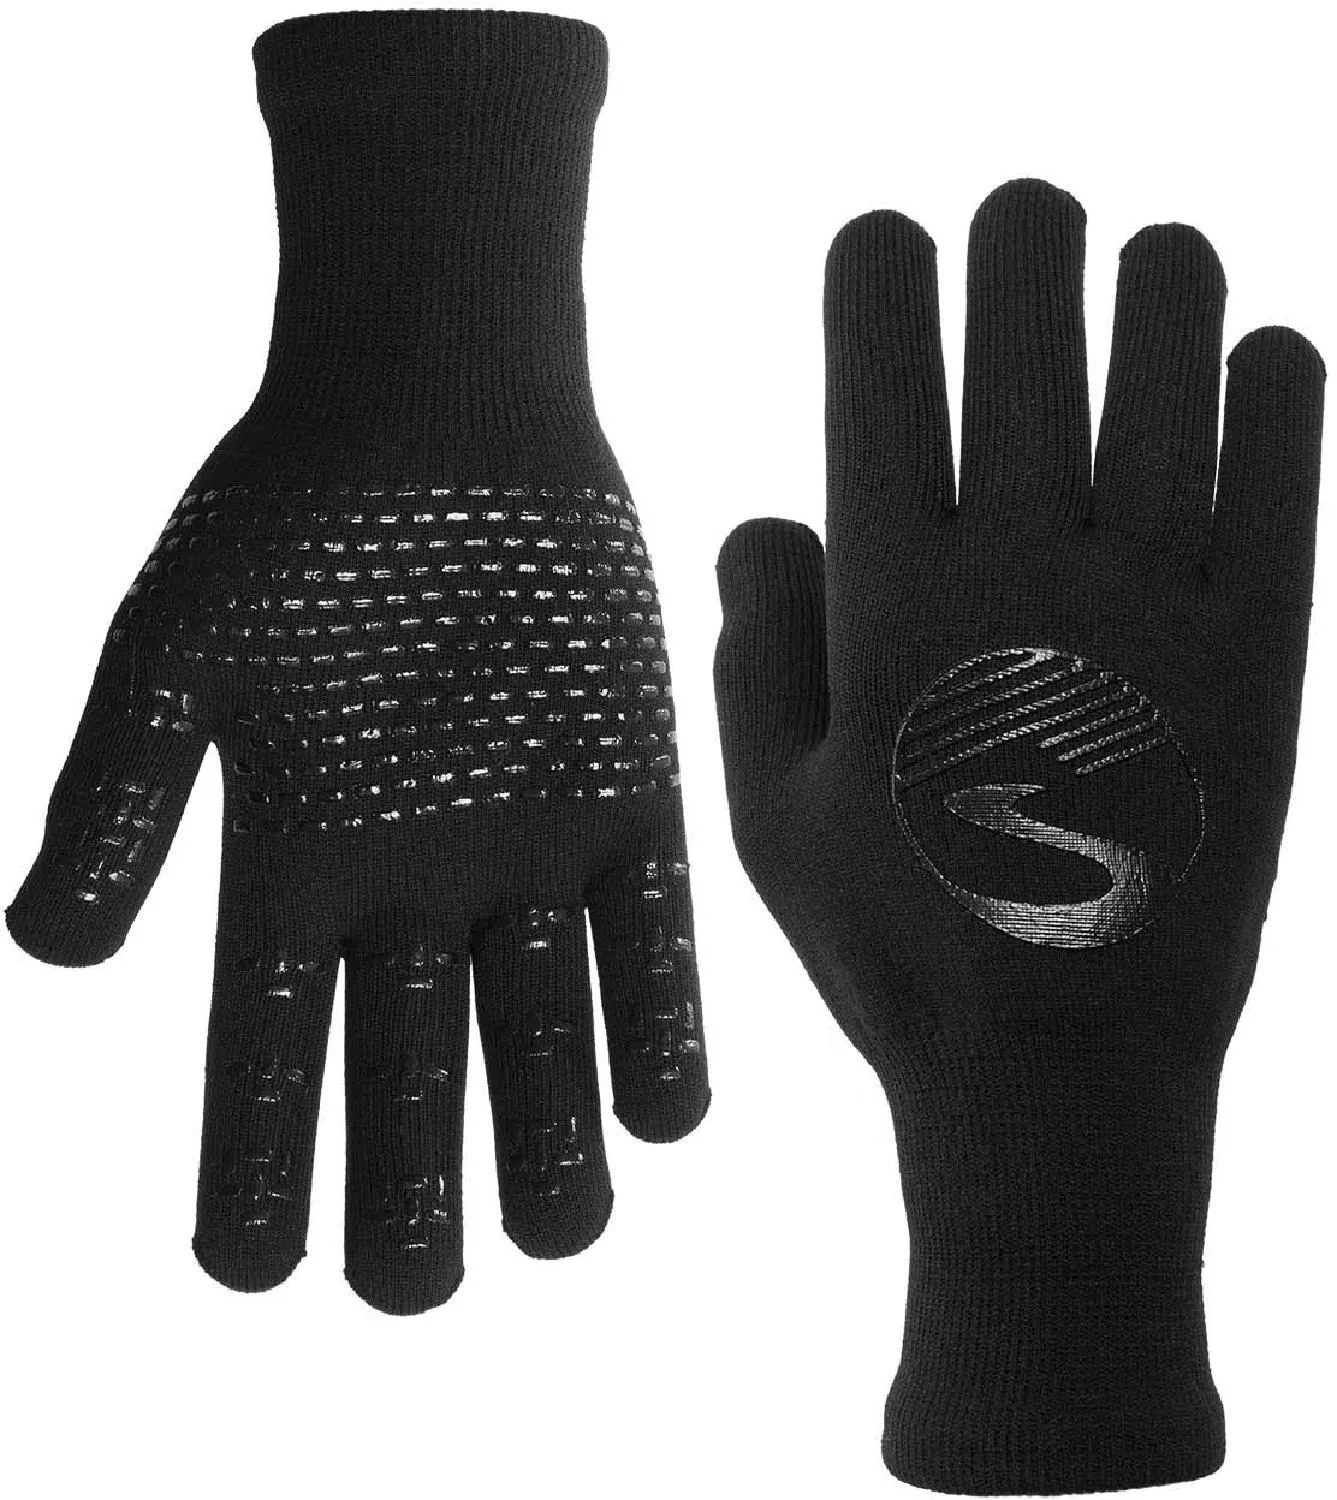 Showers Pass Crosspoint gloves